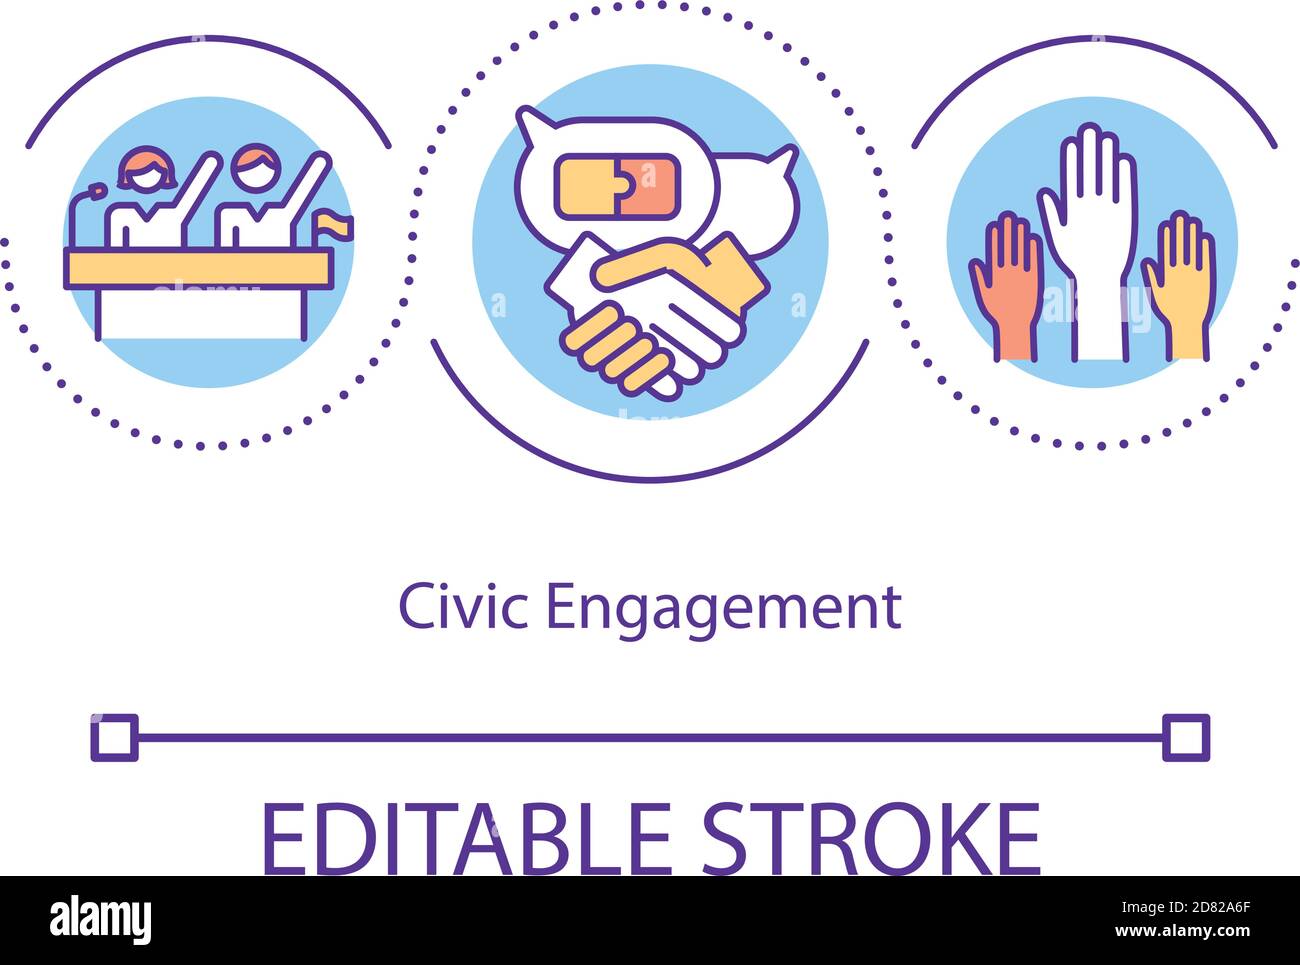 Civic engagement concept icon Stock Vector